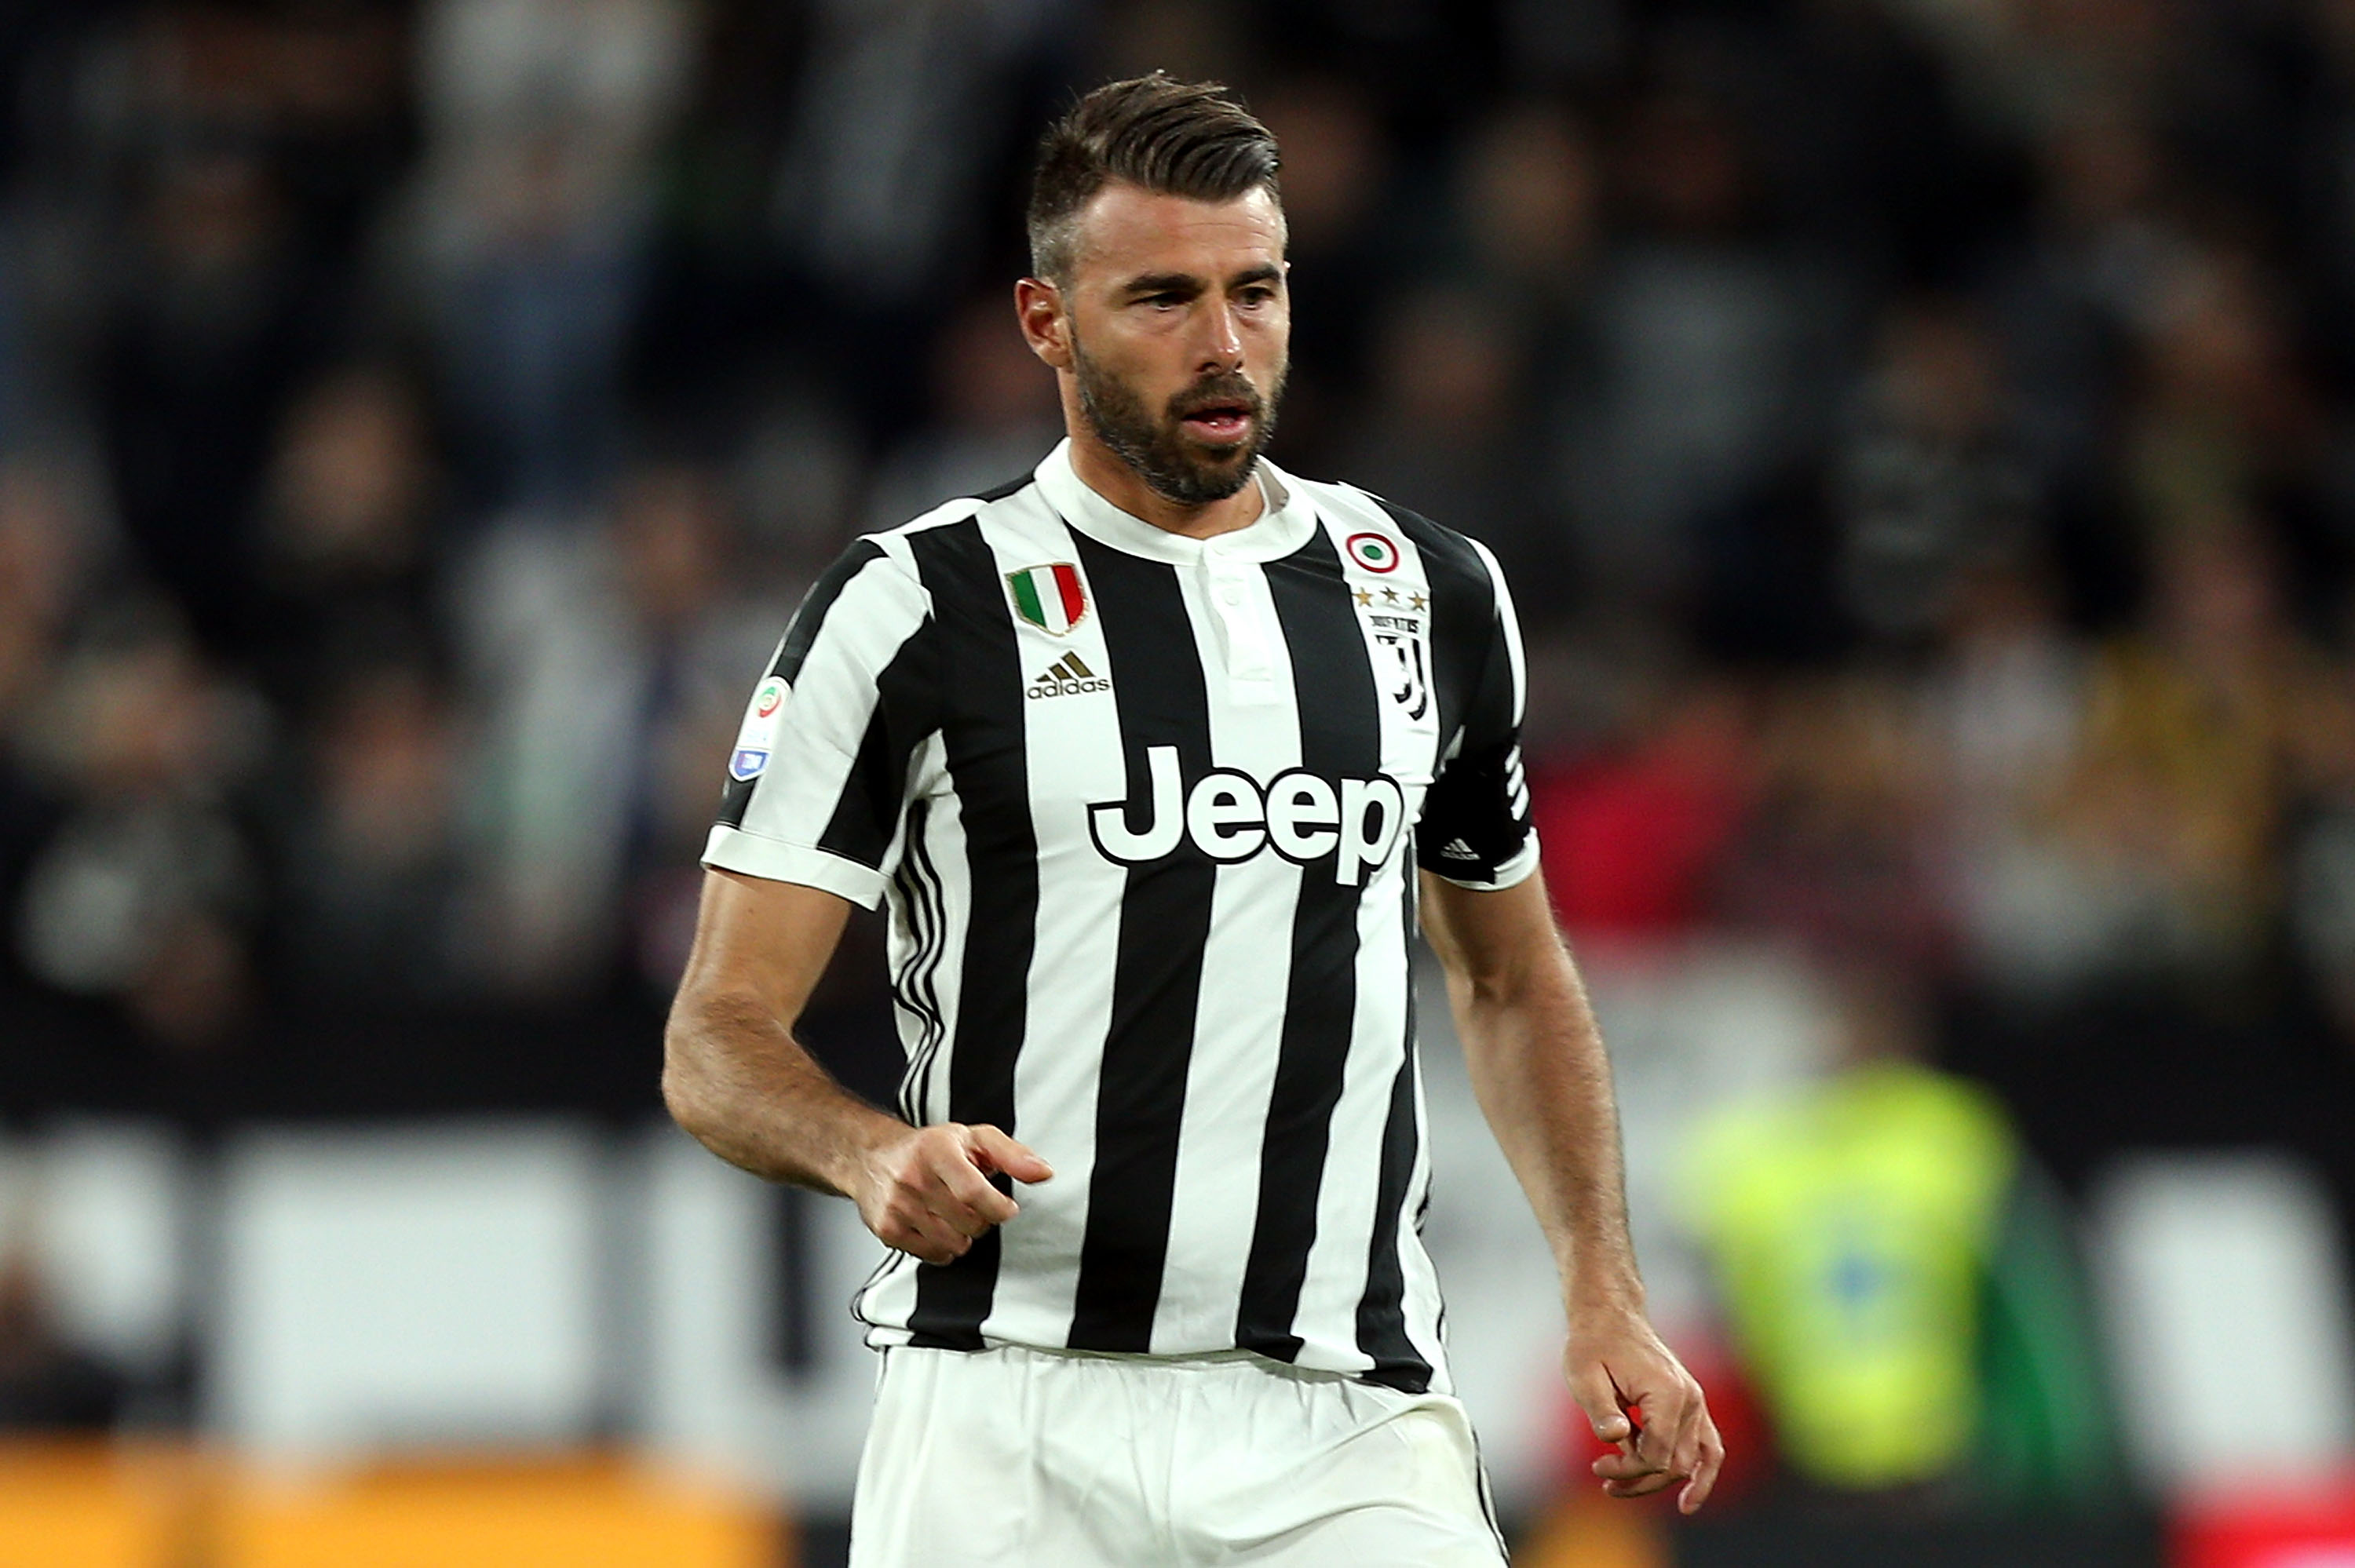 Andrea Barzagli: "This is the best Juve in years" -Juvefc.com